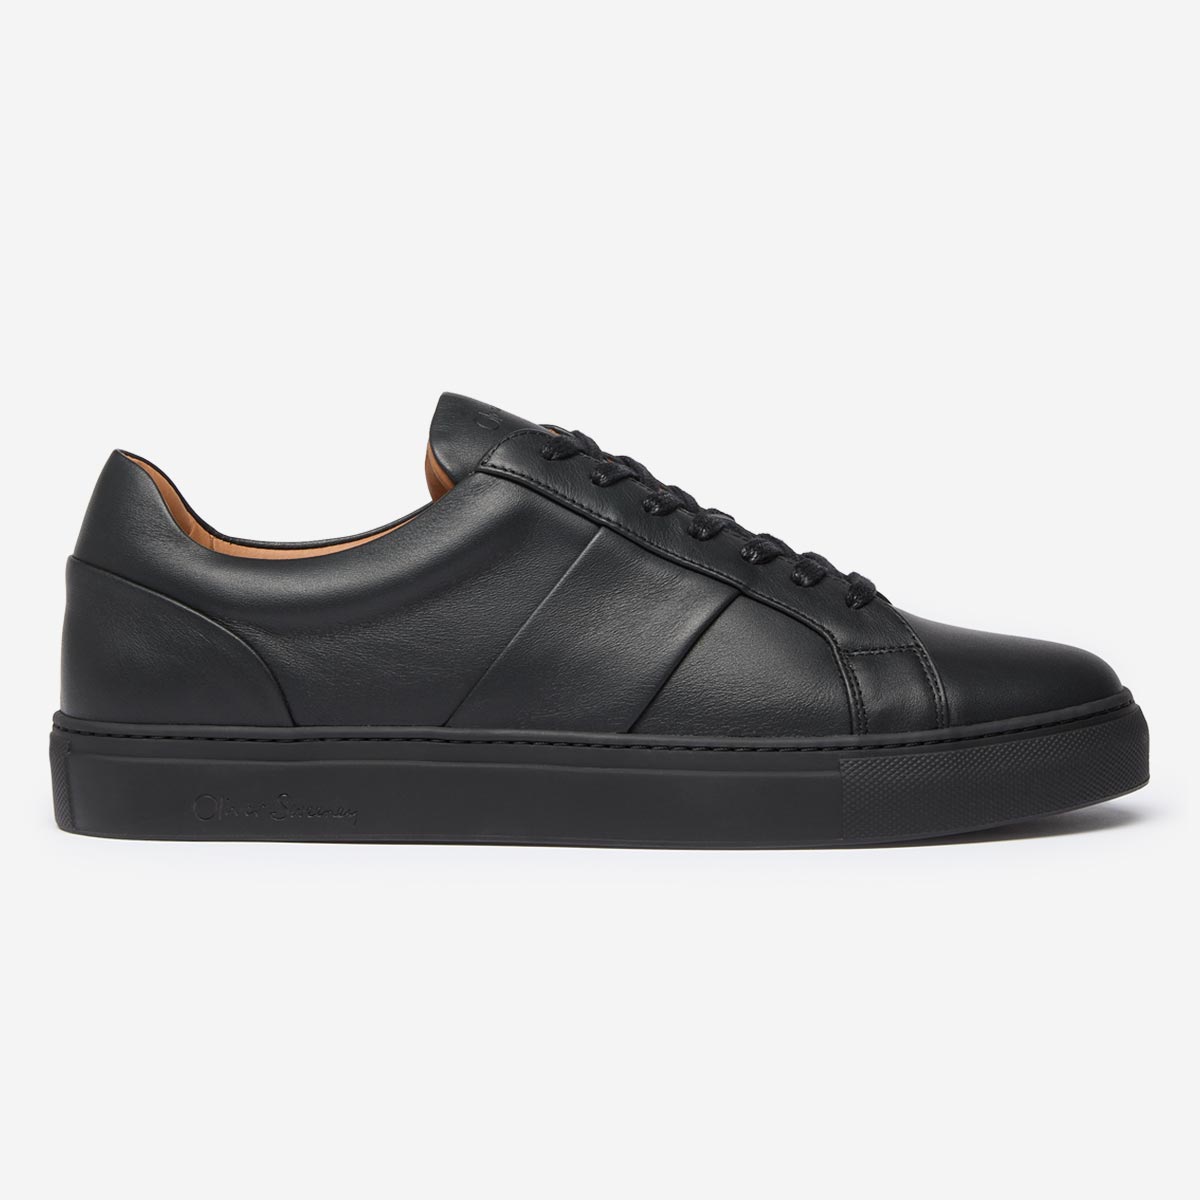 Quintos Black Leather Trainers | Men's Trainers | Oliver Sweeney